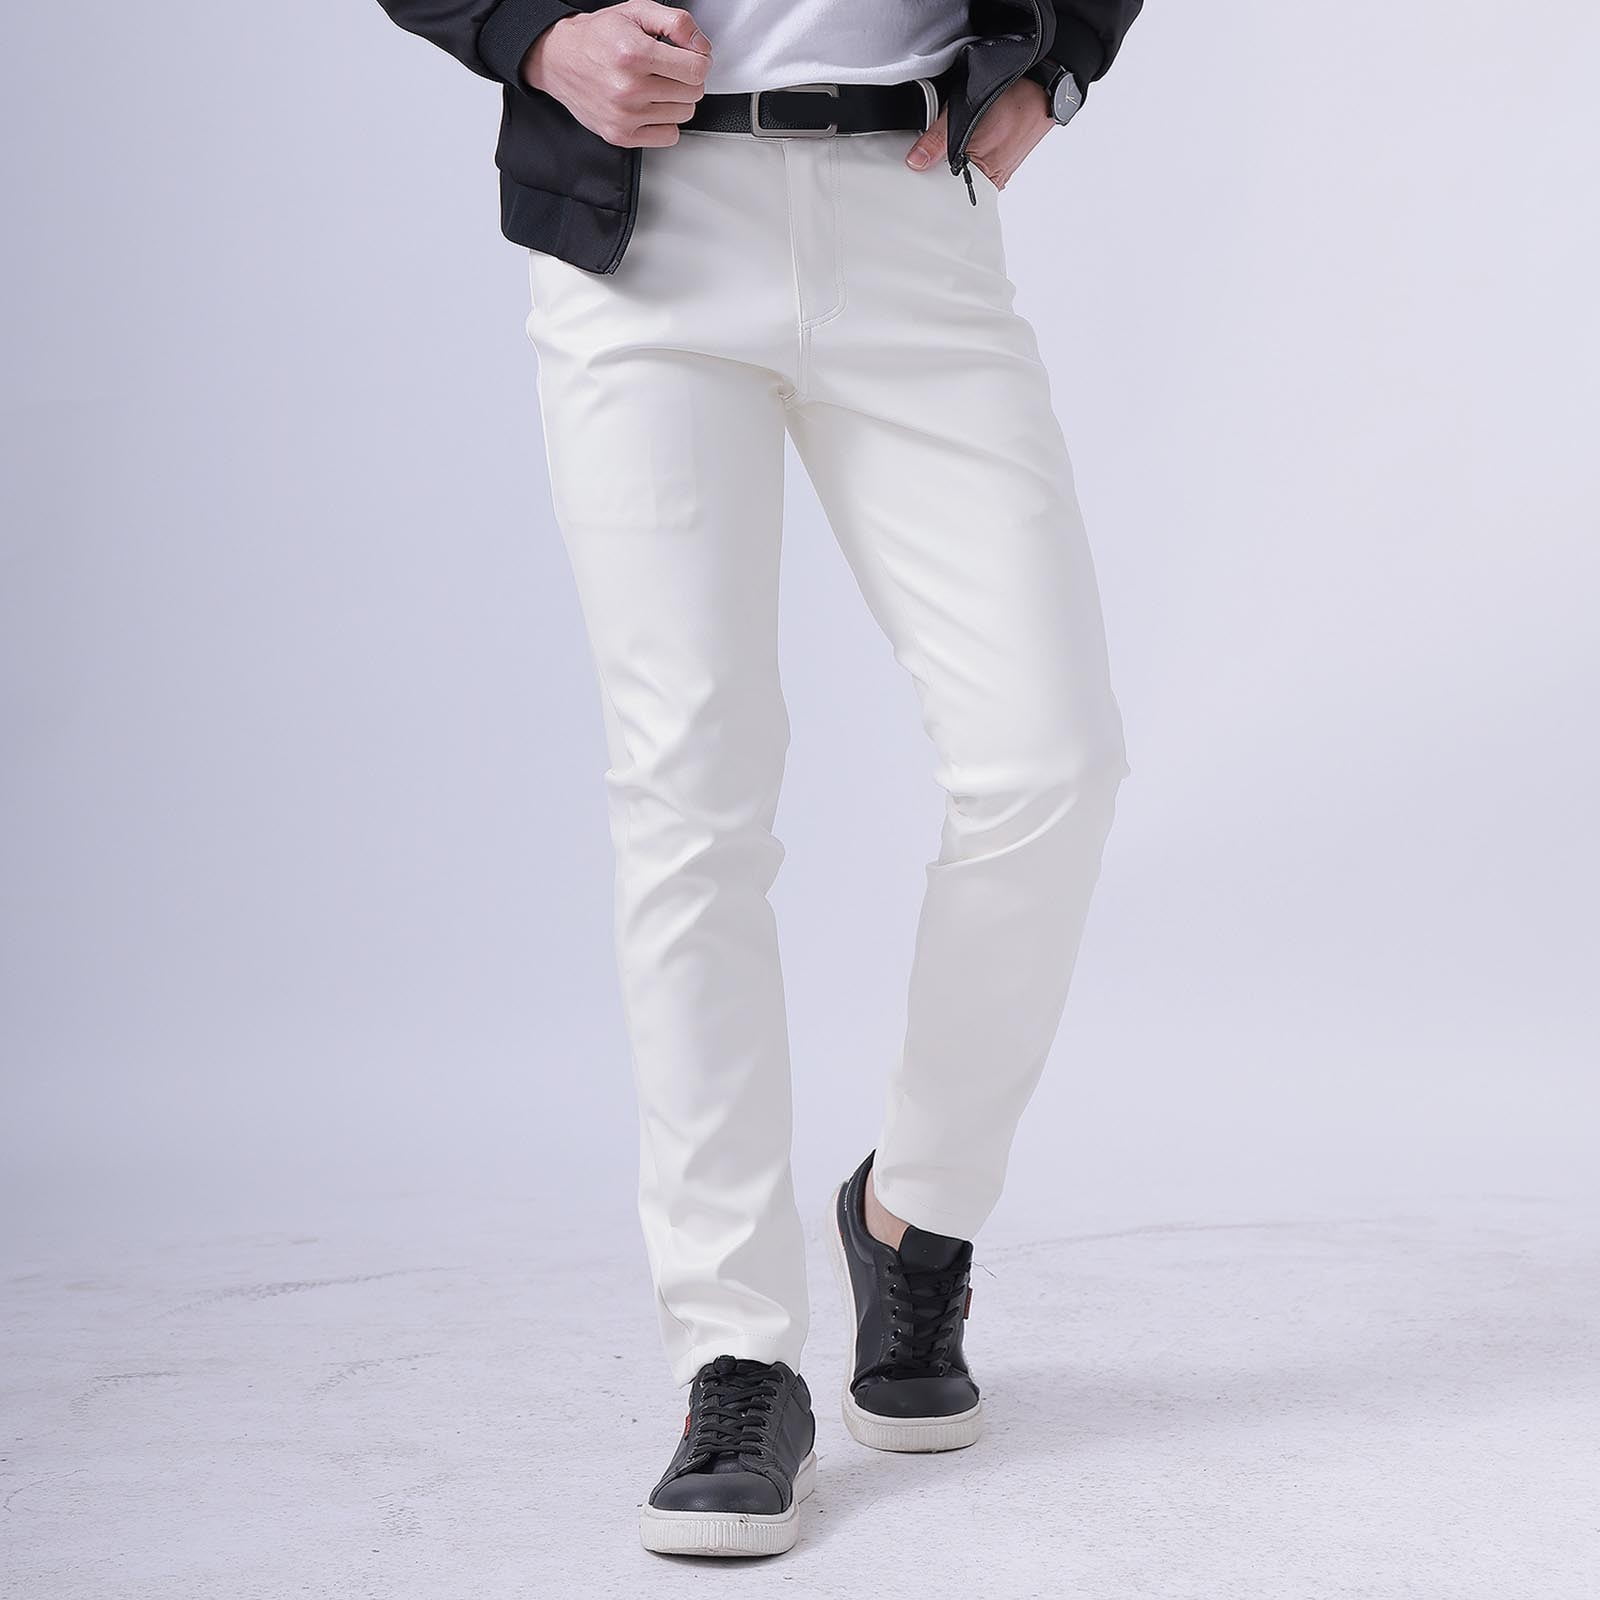 Mens Cargo Shorts Mens Slim Fitting Leather Pants Leggings Color Elastic  Trend Motorcycle Leather Pants White 